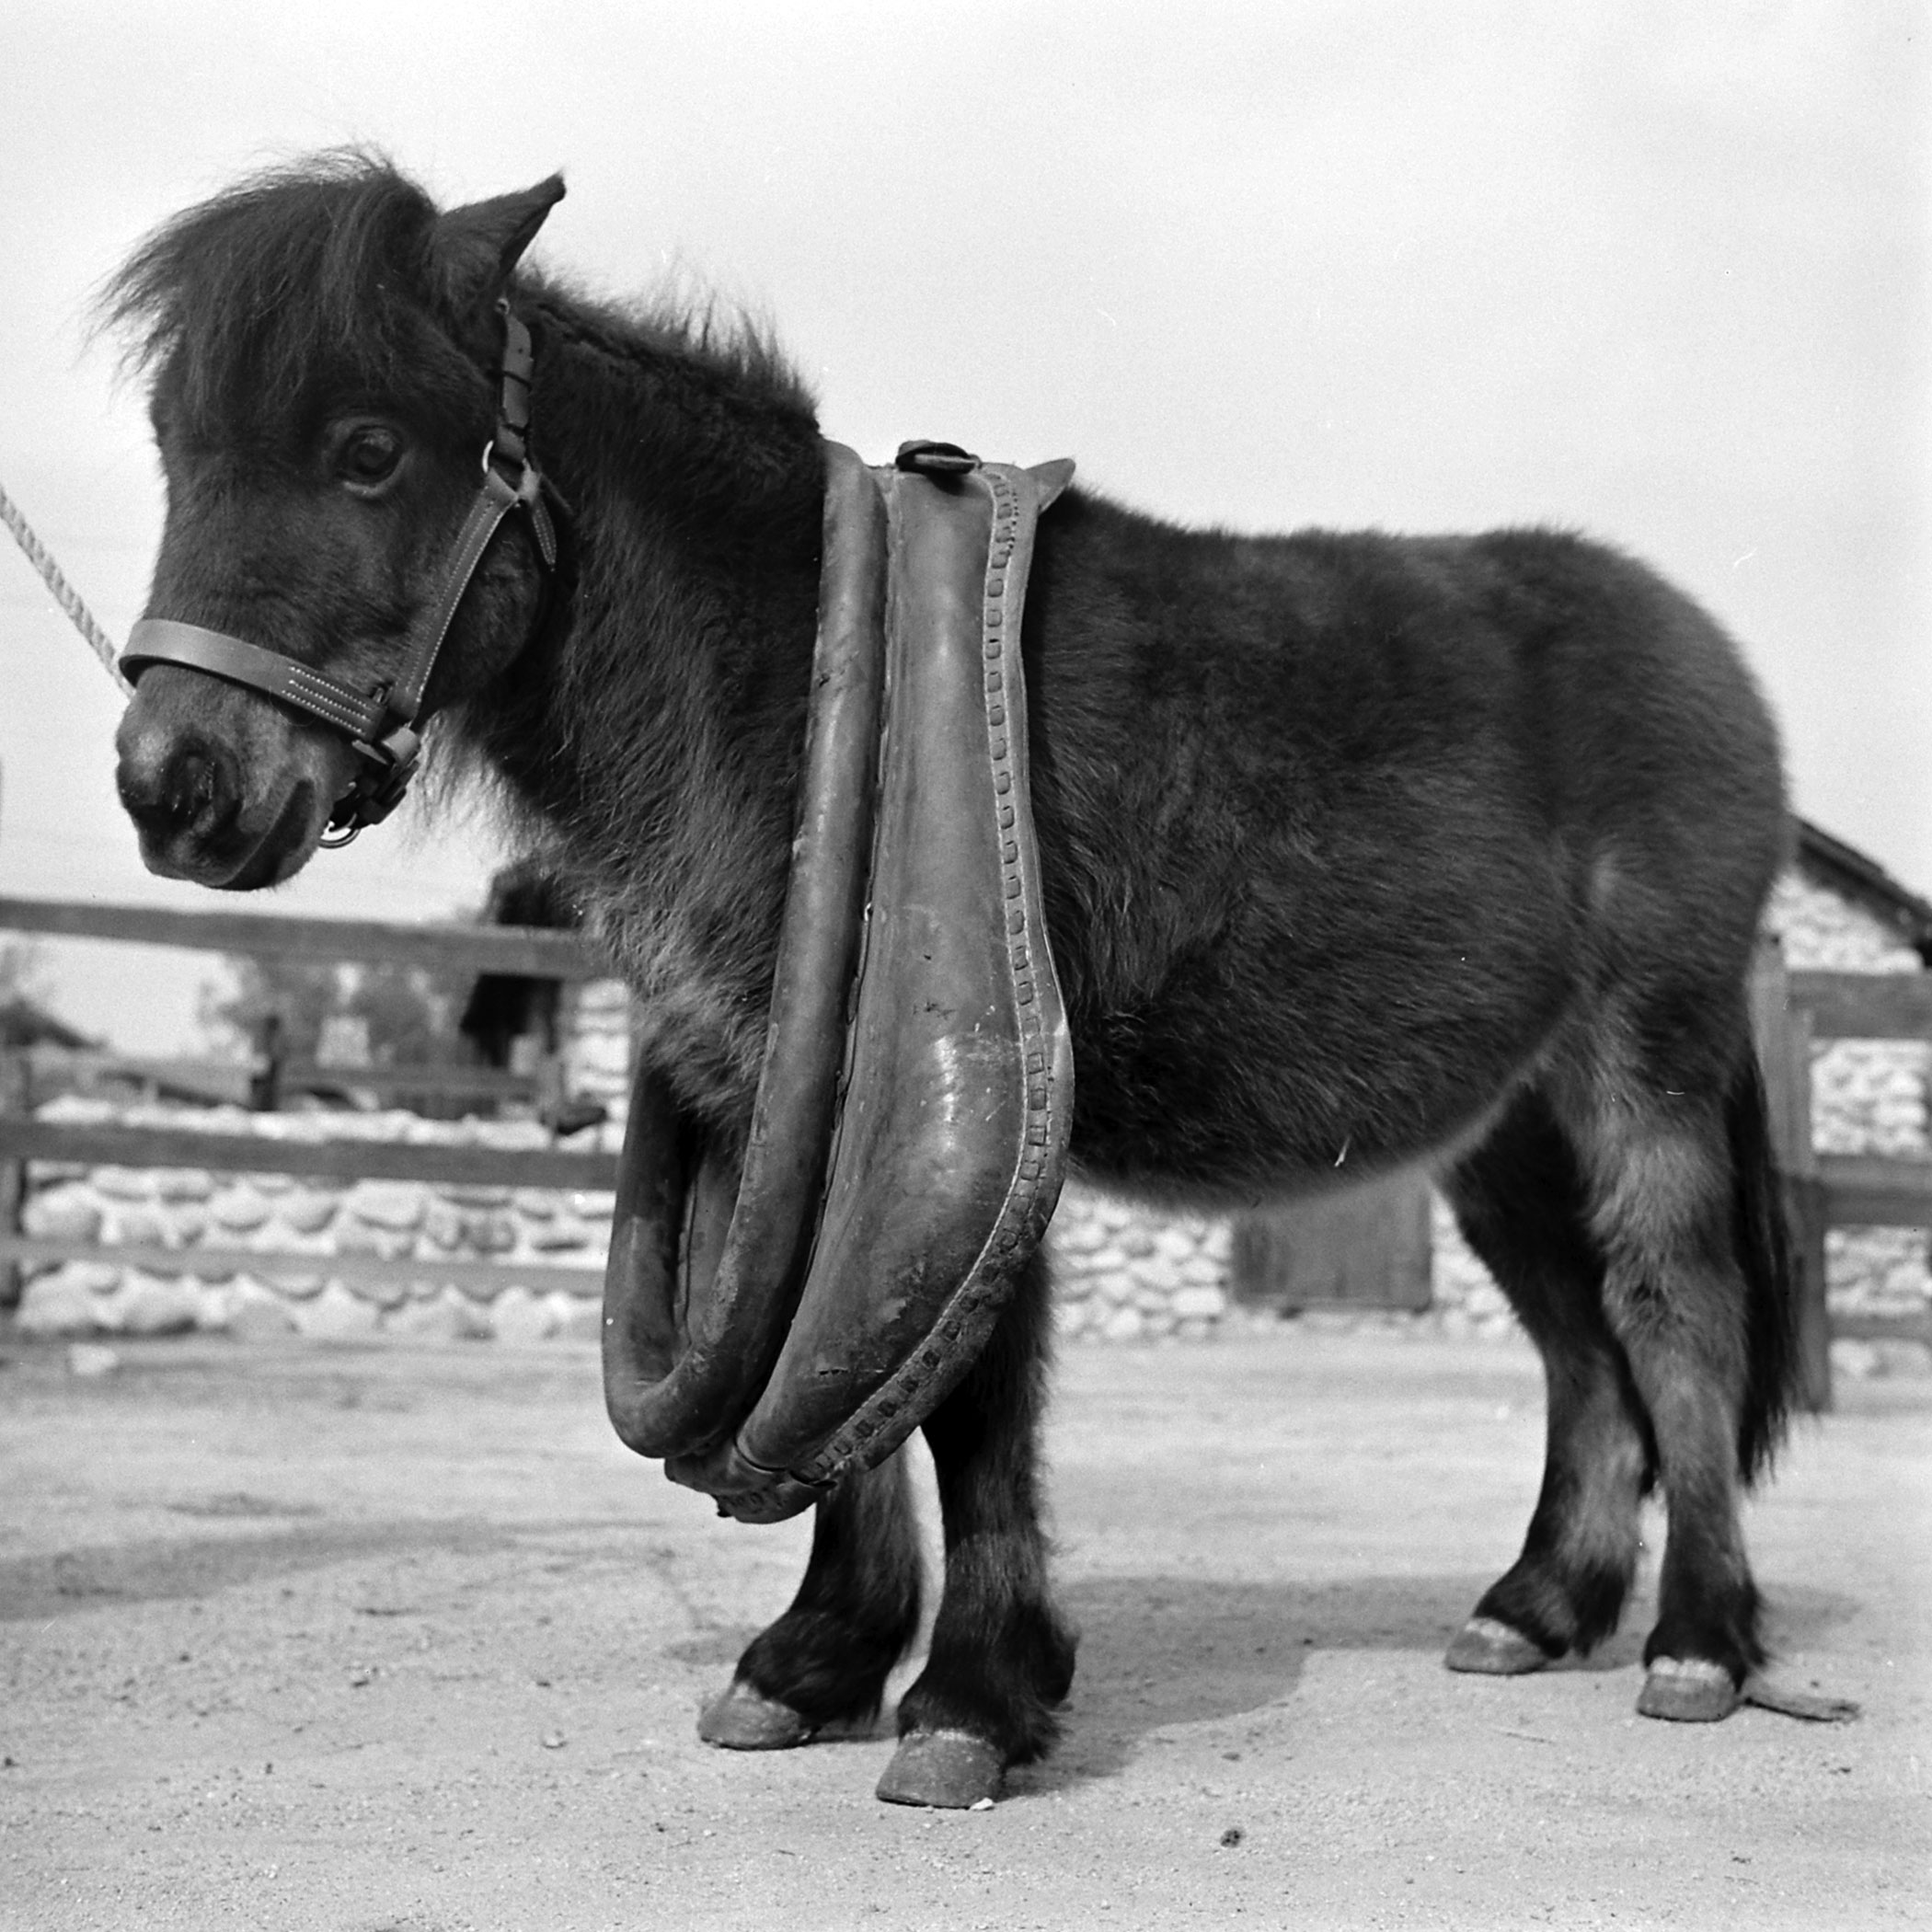 Ronnie stands uncomfortably with normal horse collar. He eats only four pounds of hay a day compared to 40 pounds for draft horse.